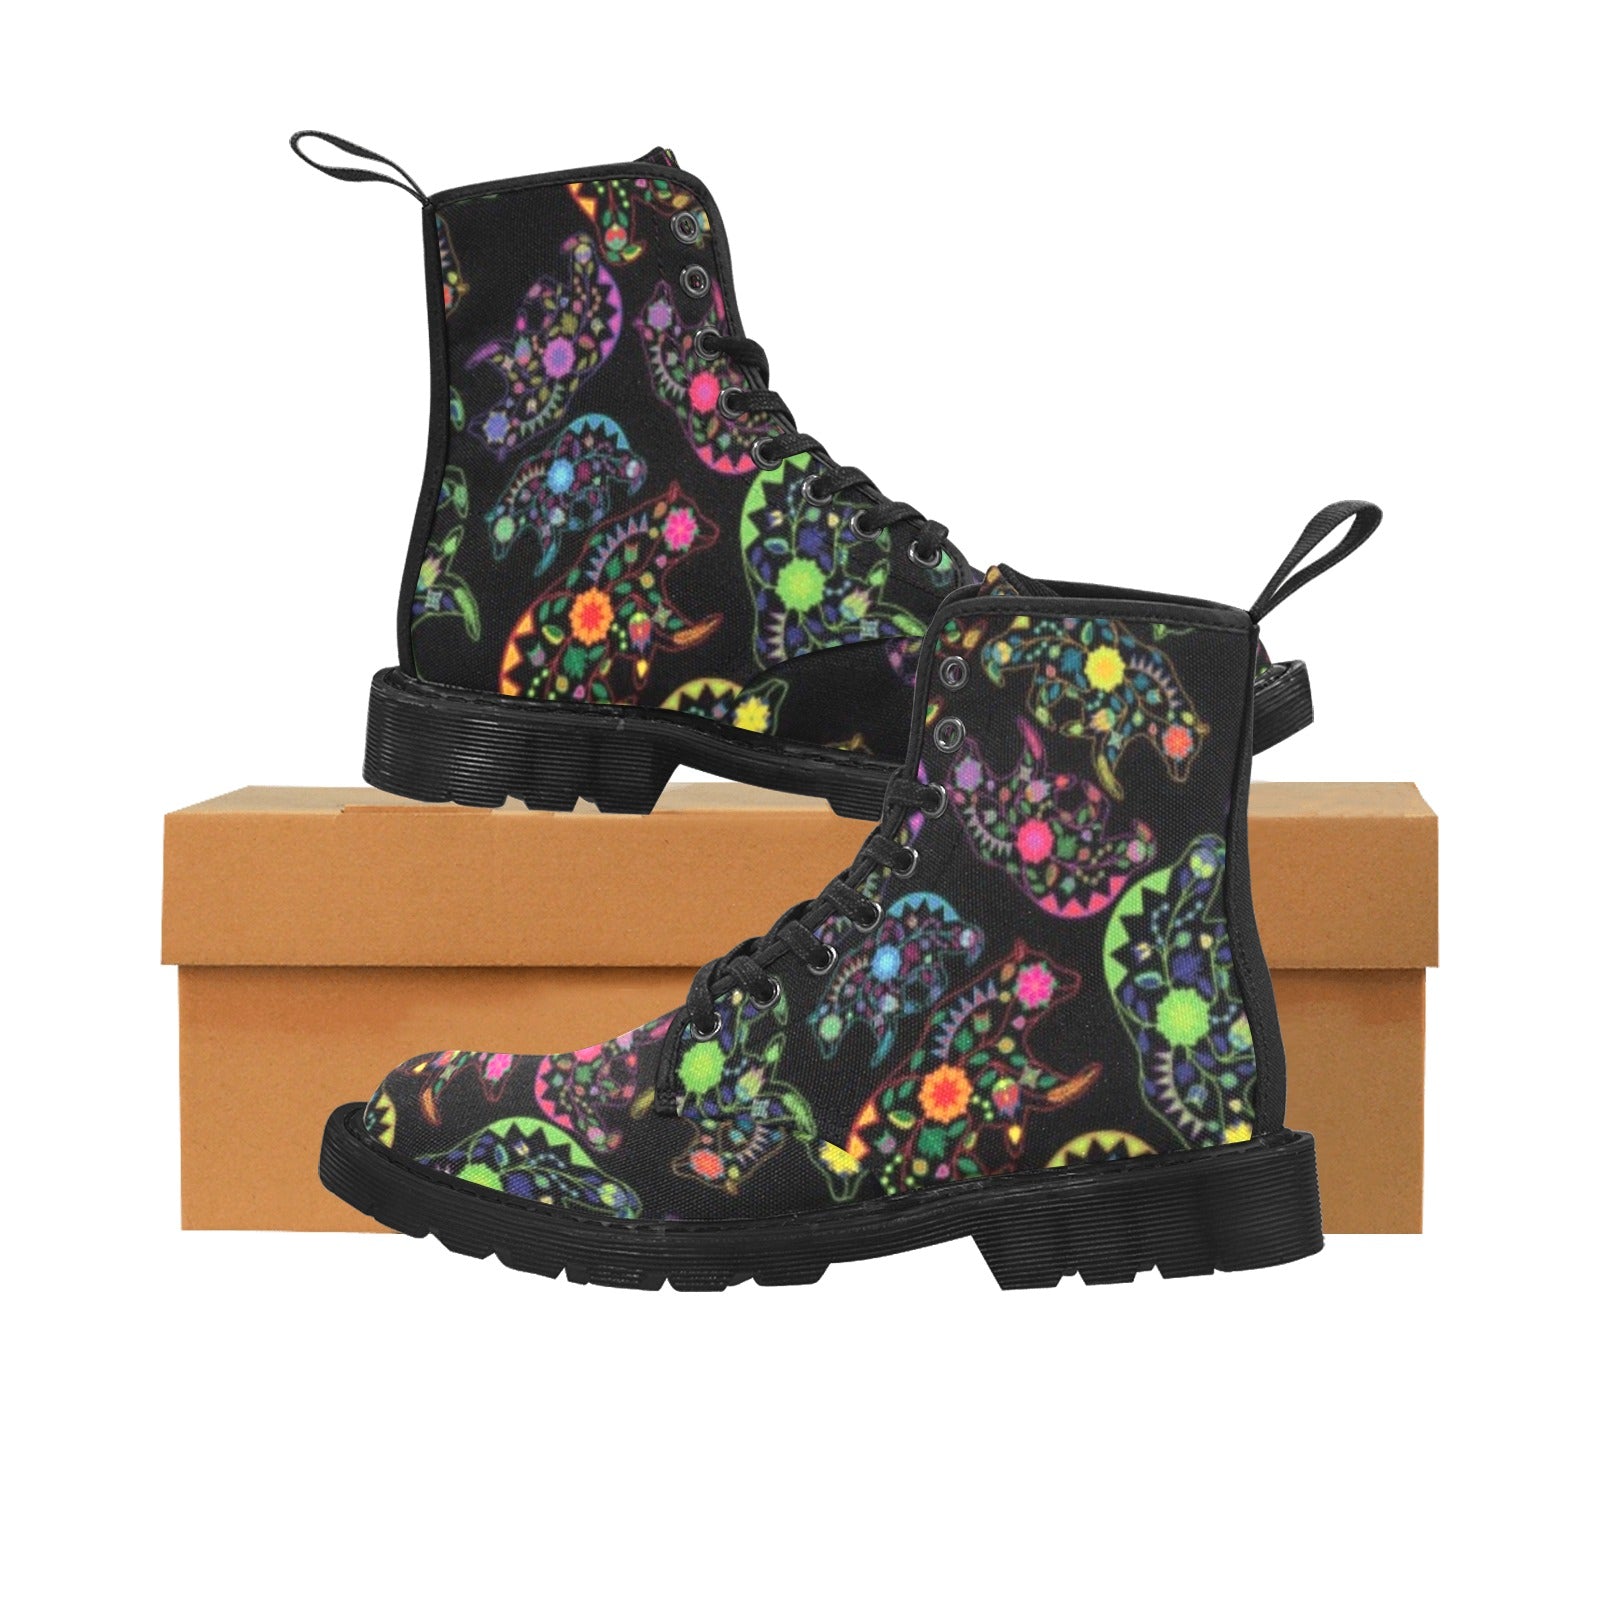 Neon Floral Bears Boots for Women (Black)